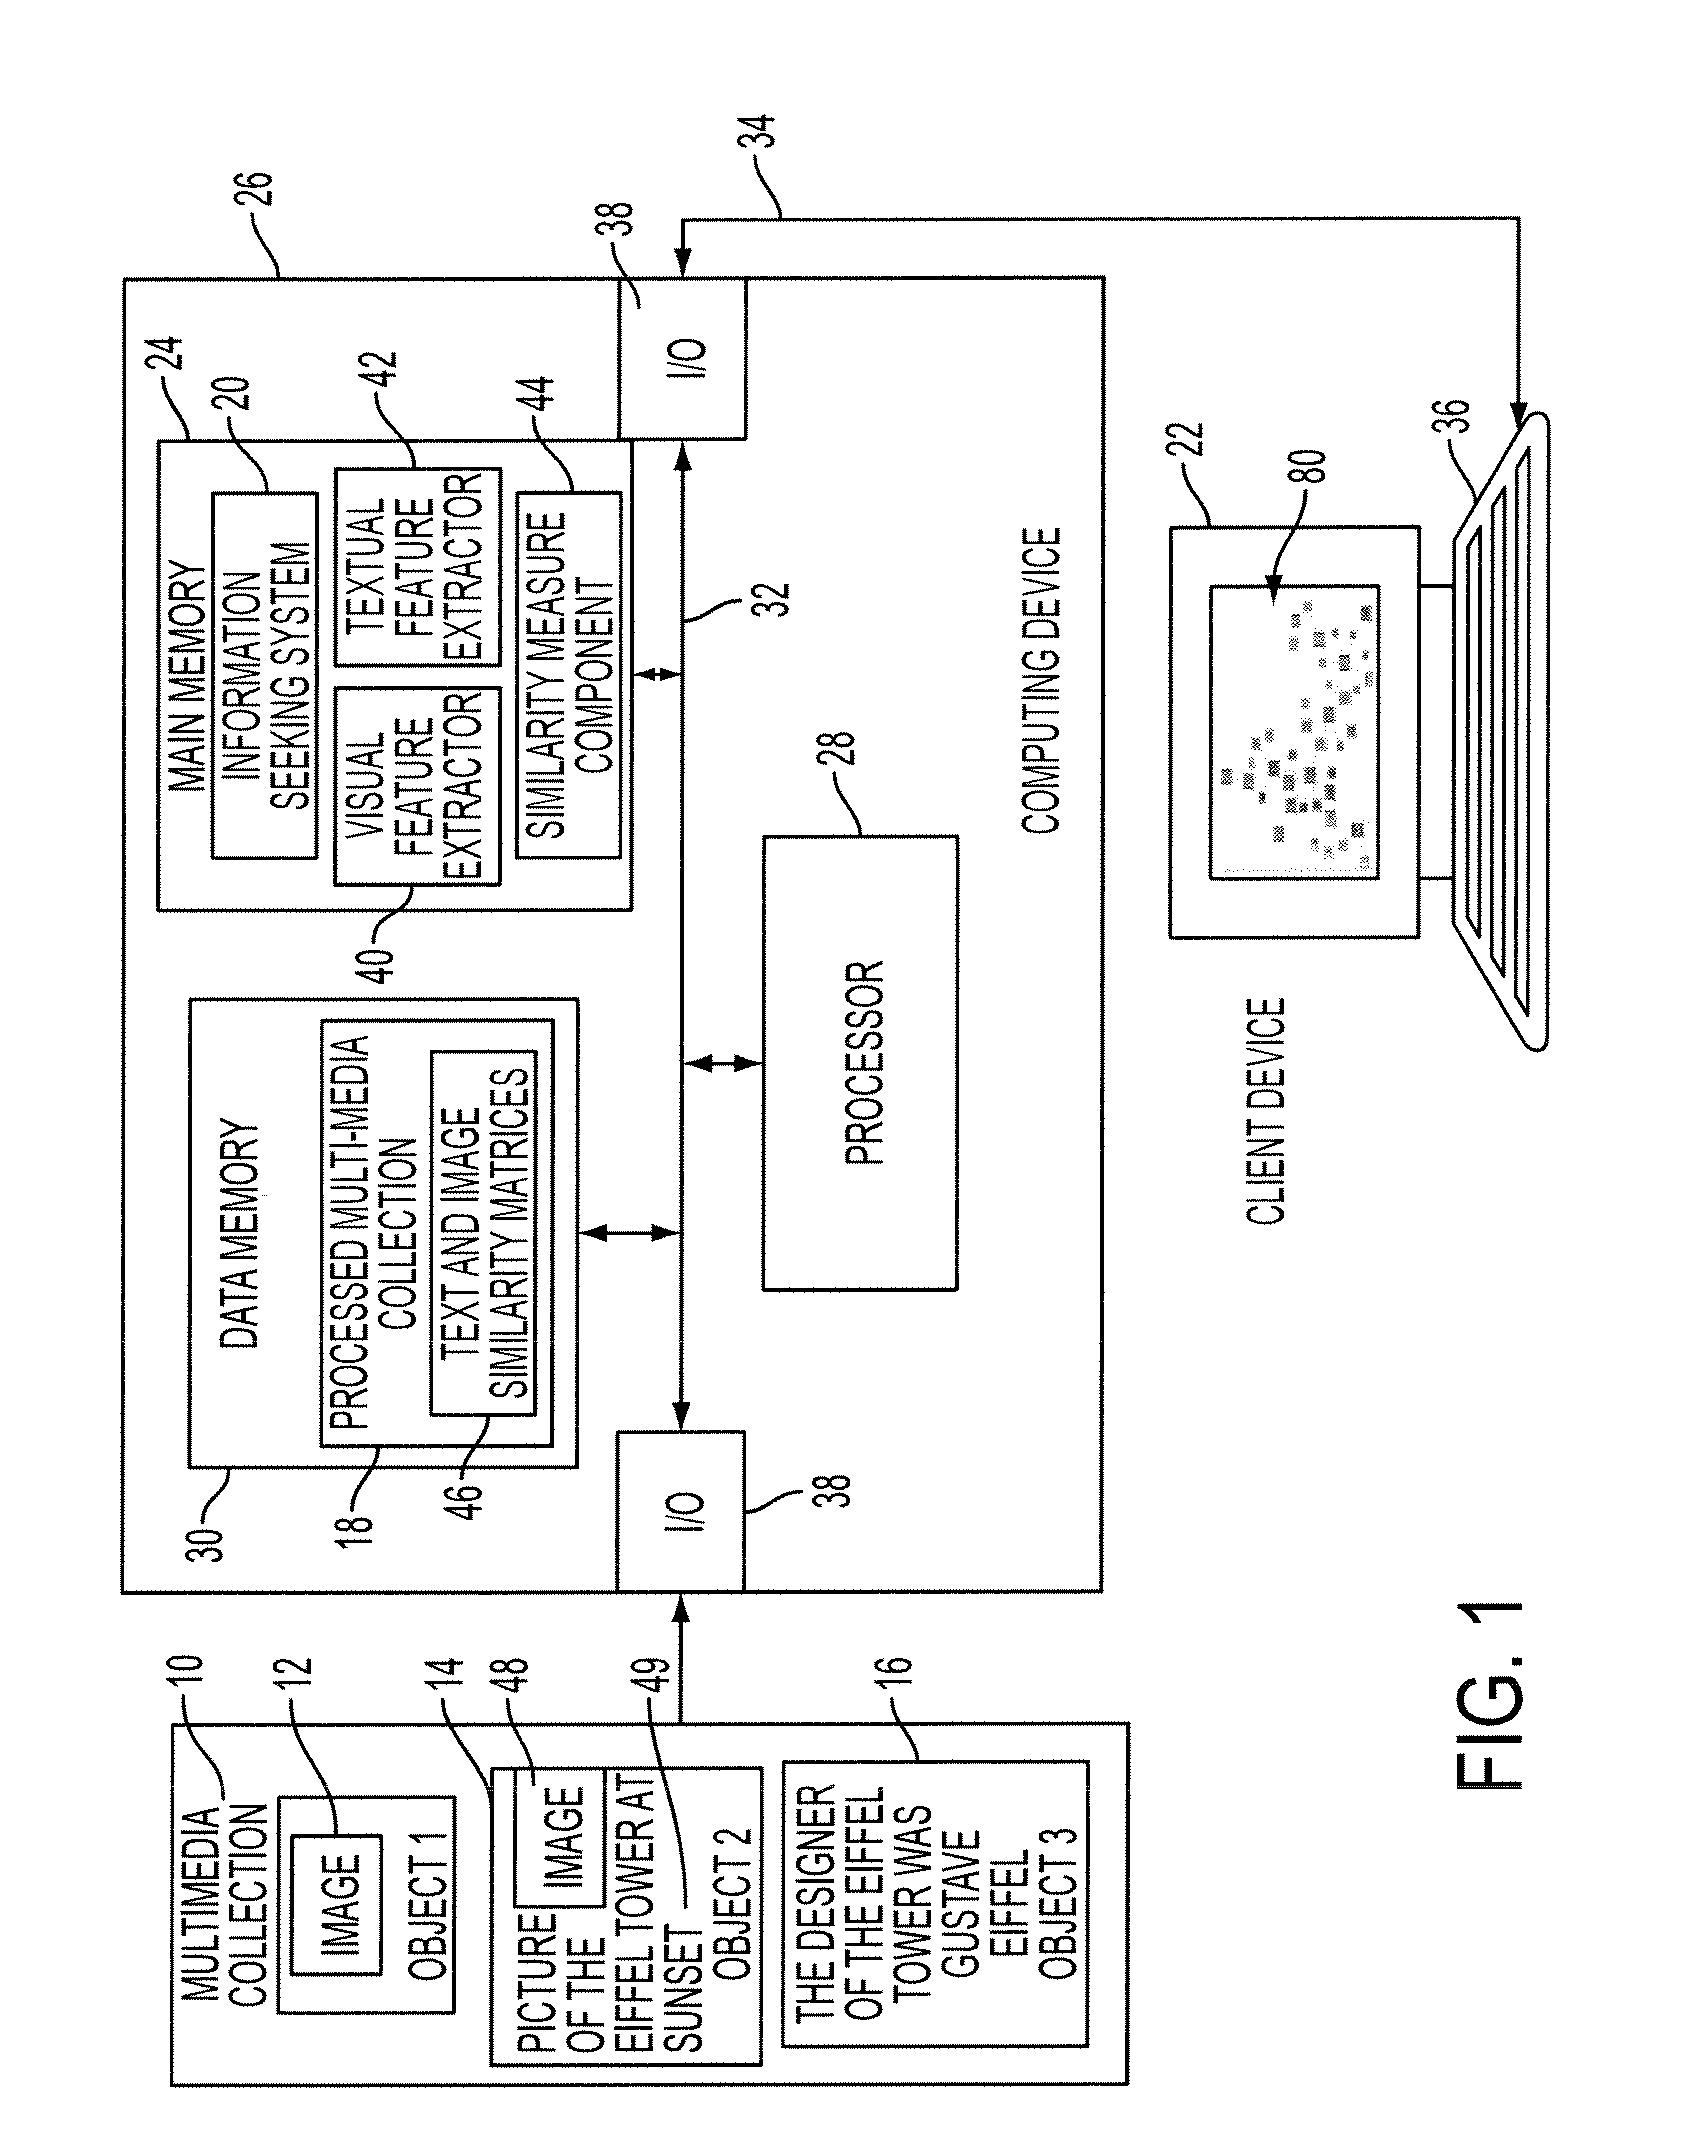 System and method for information seeking in a multimedia collection